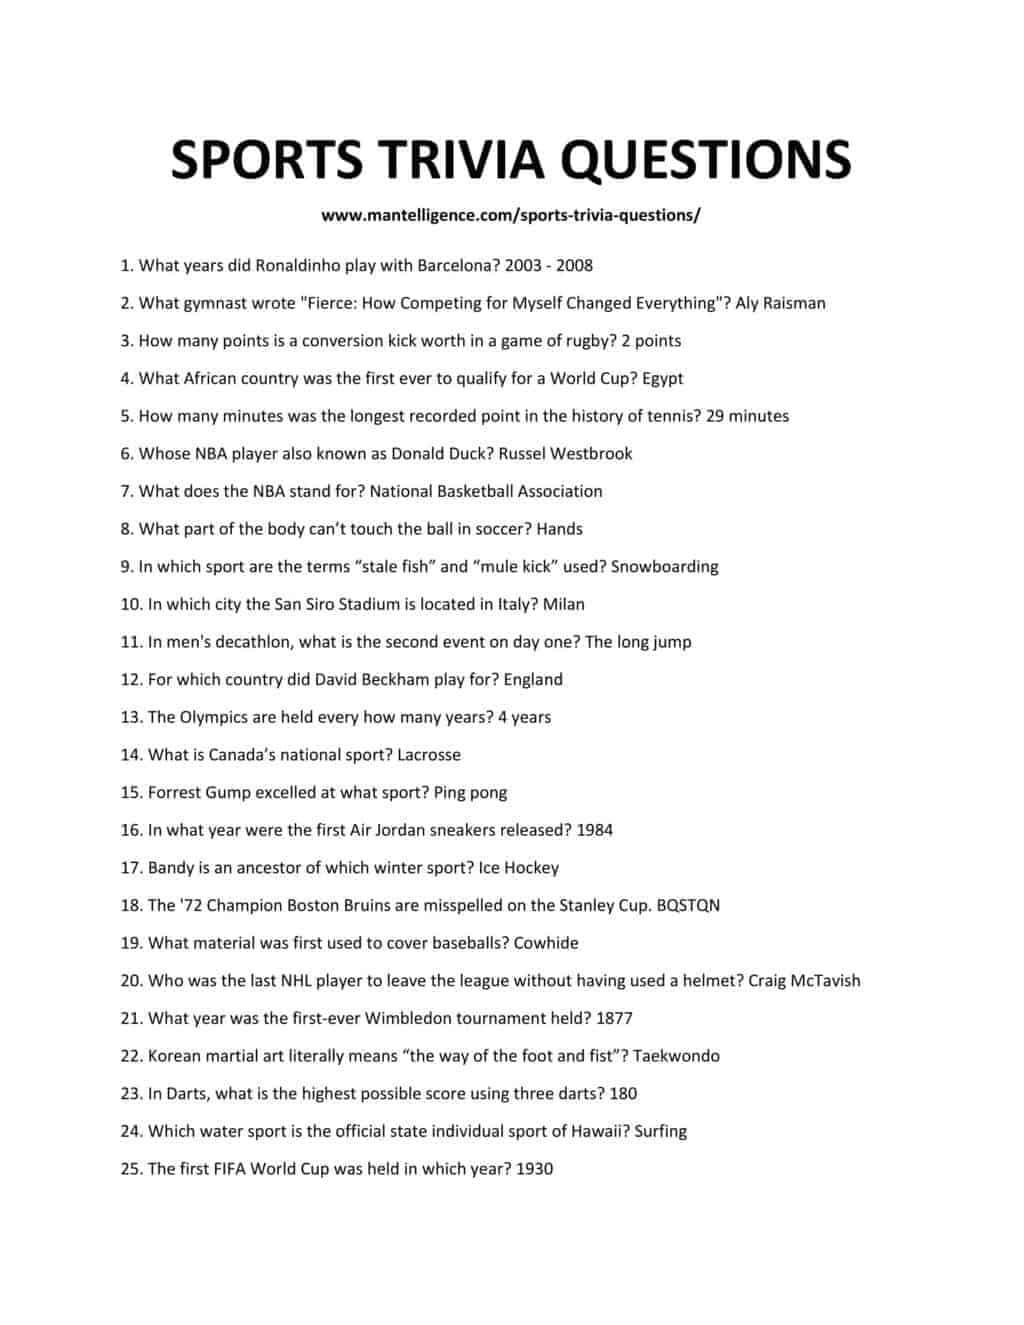 Hard Sports Trivia Questions And Answers